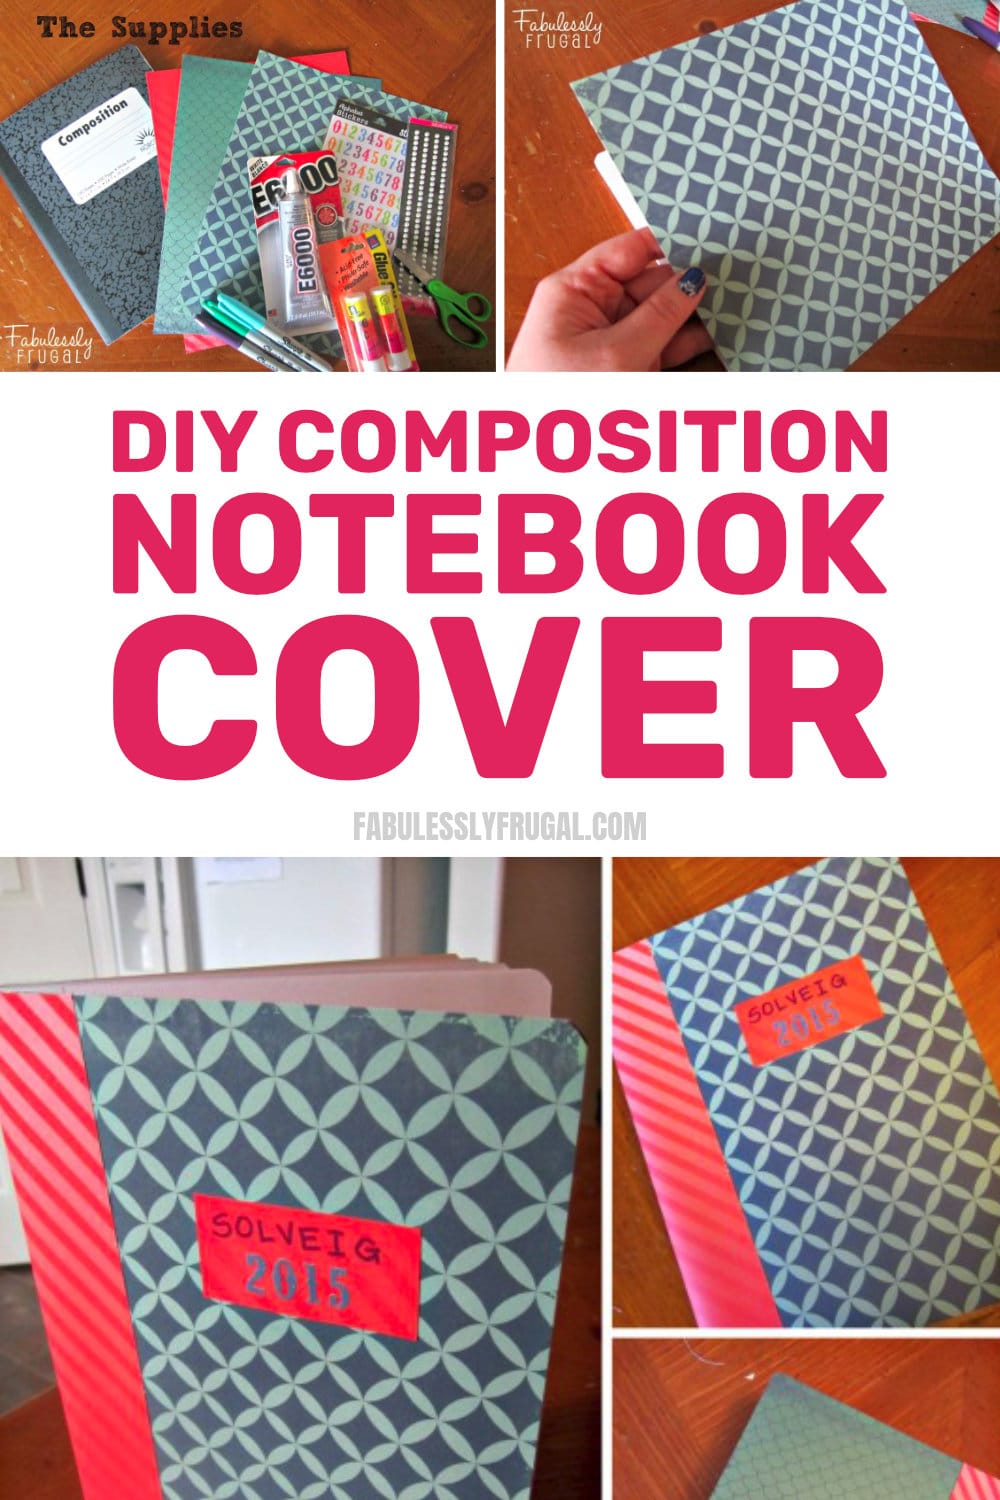 DIY composition notebook cover